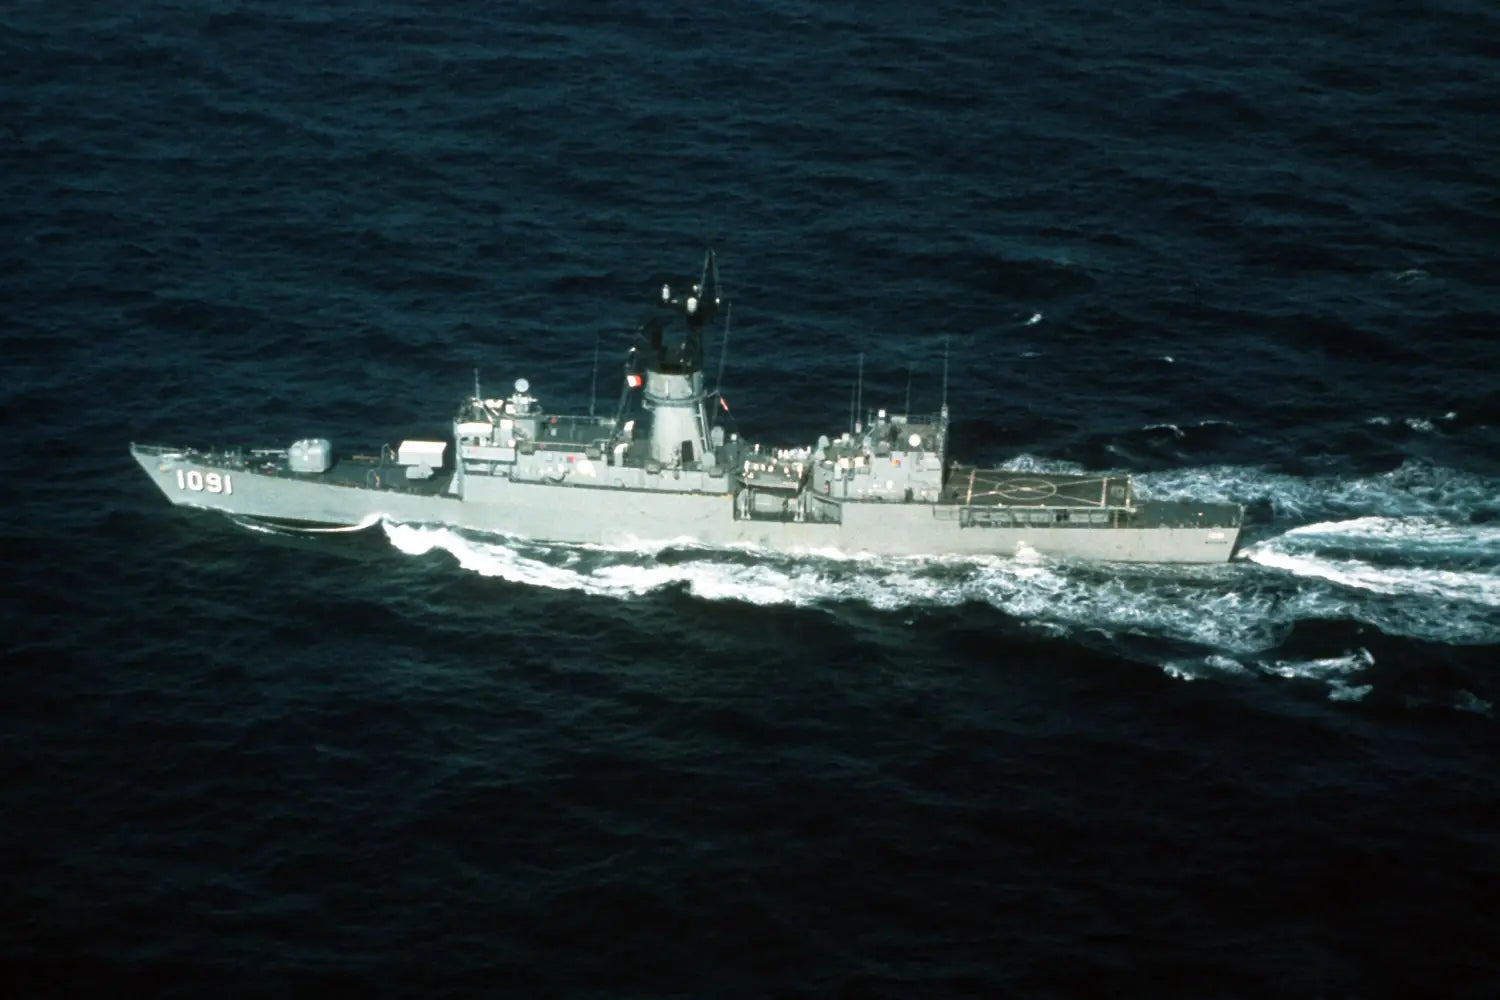 USS Miller (FF-1091), a Knox-class frigate commissioned in 1973, in honor of Miller